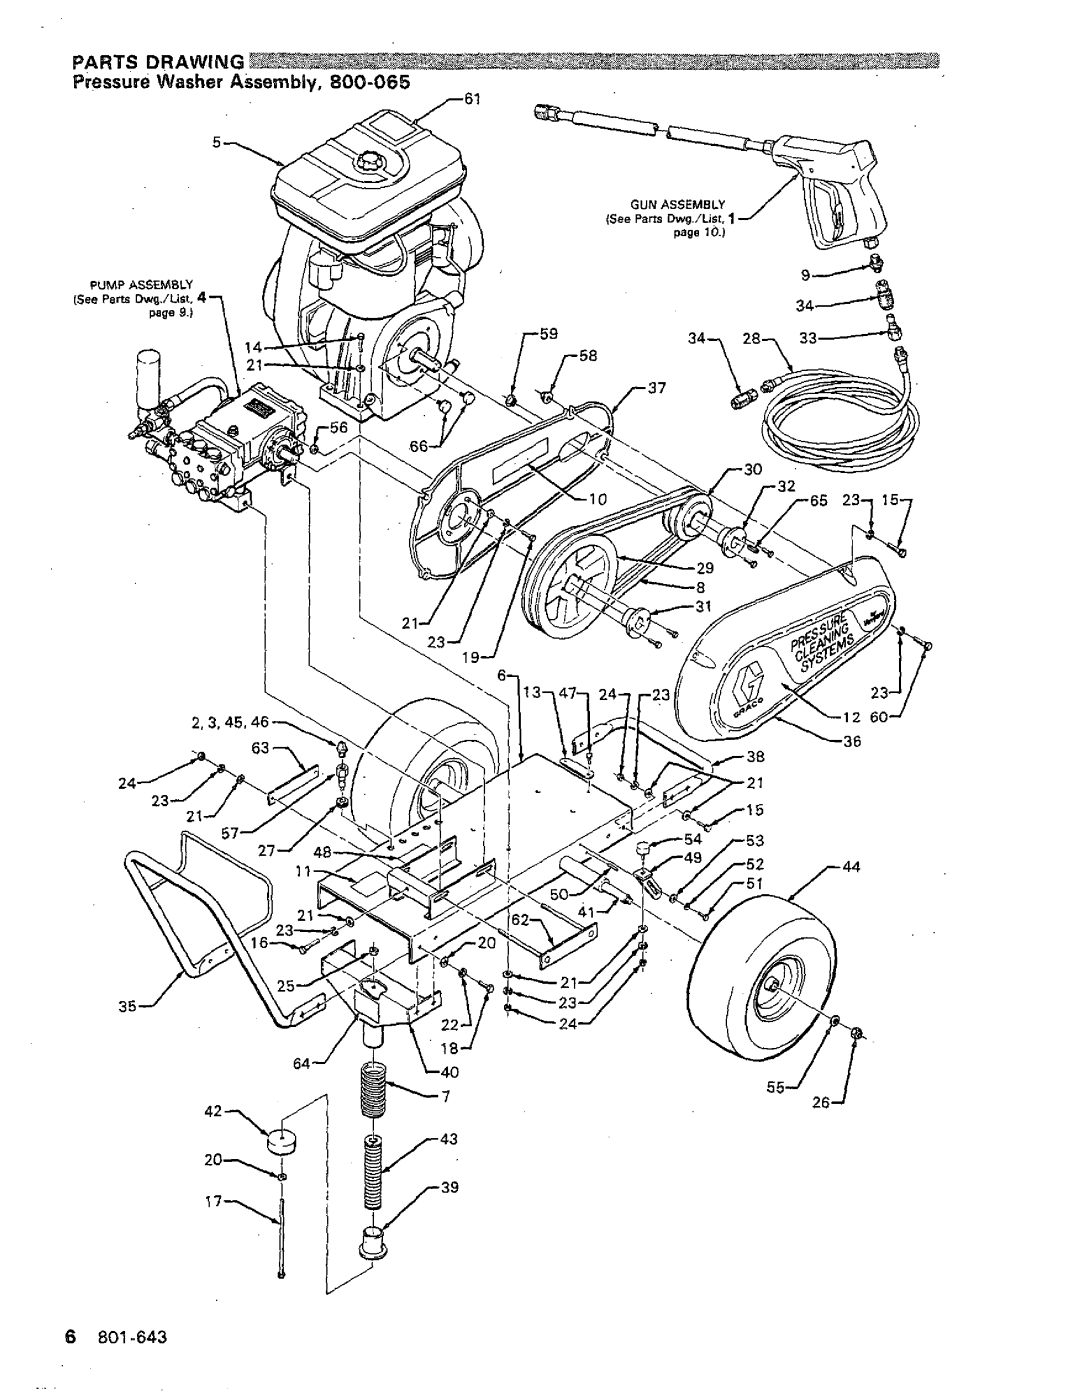 Graco Inc manual PARTSDRAWING Pressure Washer Assembly, 6801-643, 42%0 - y 